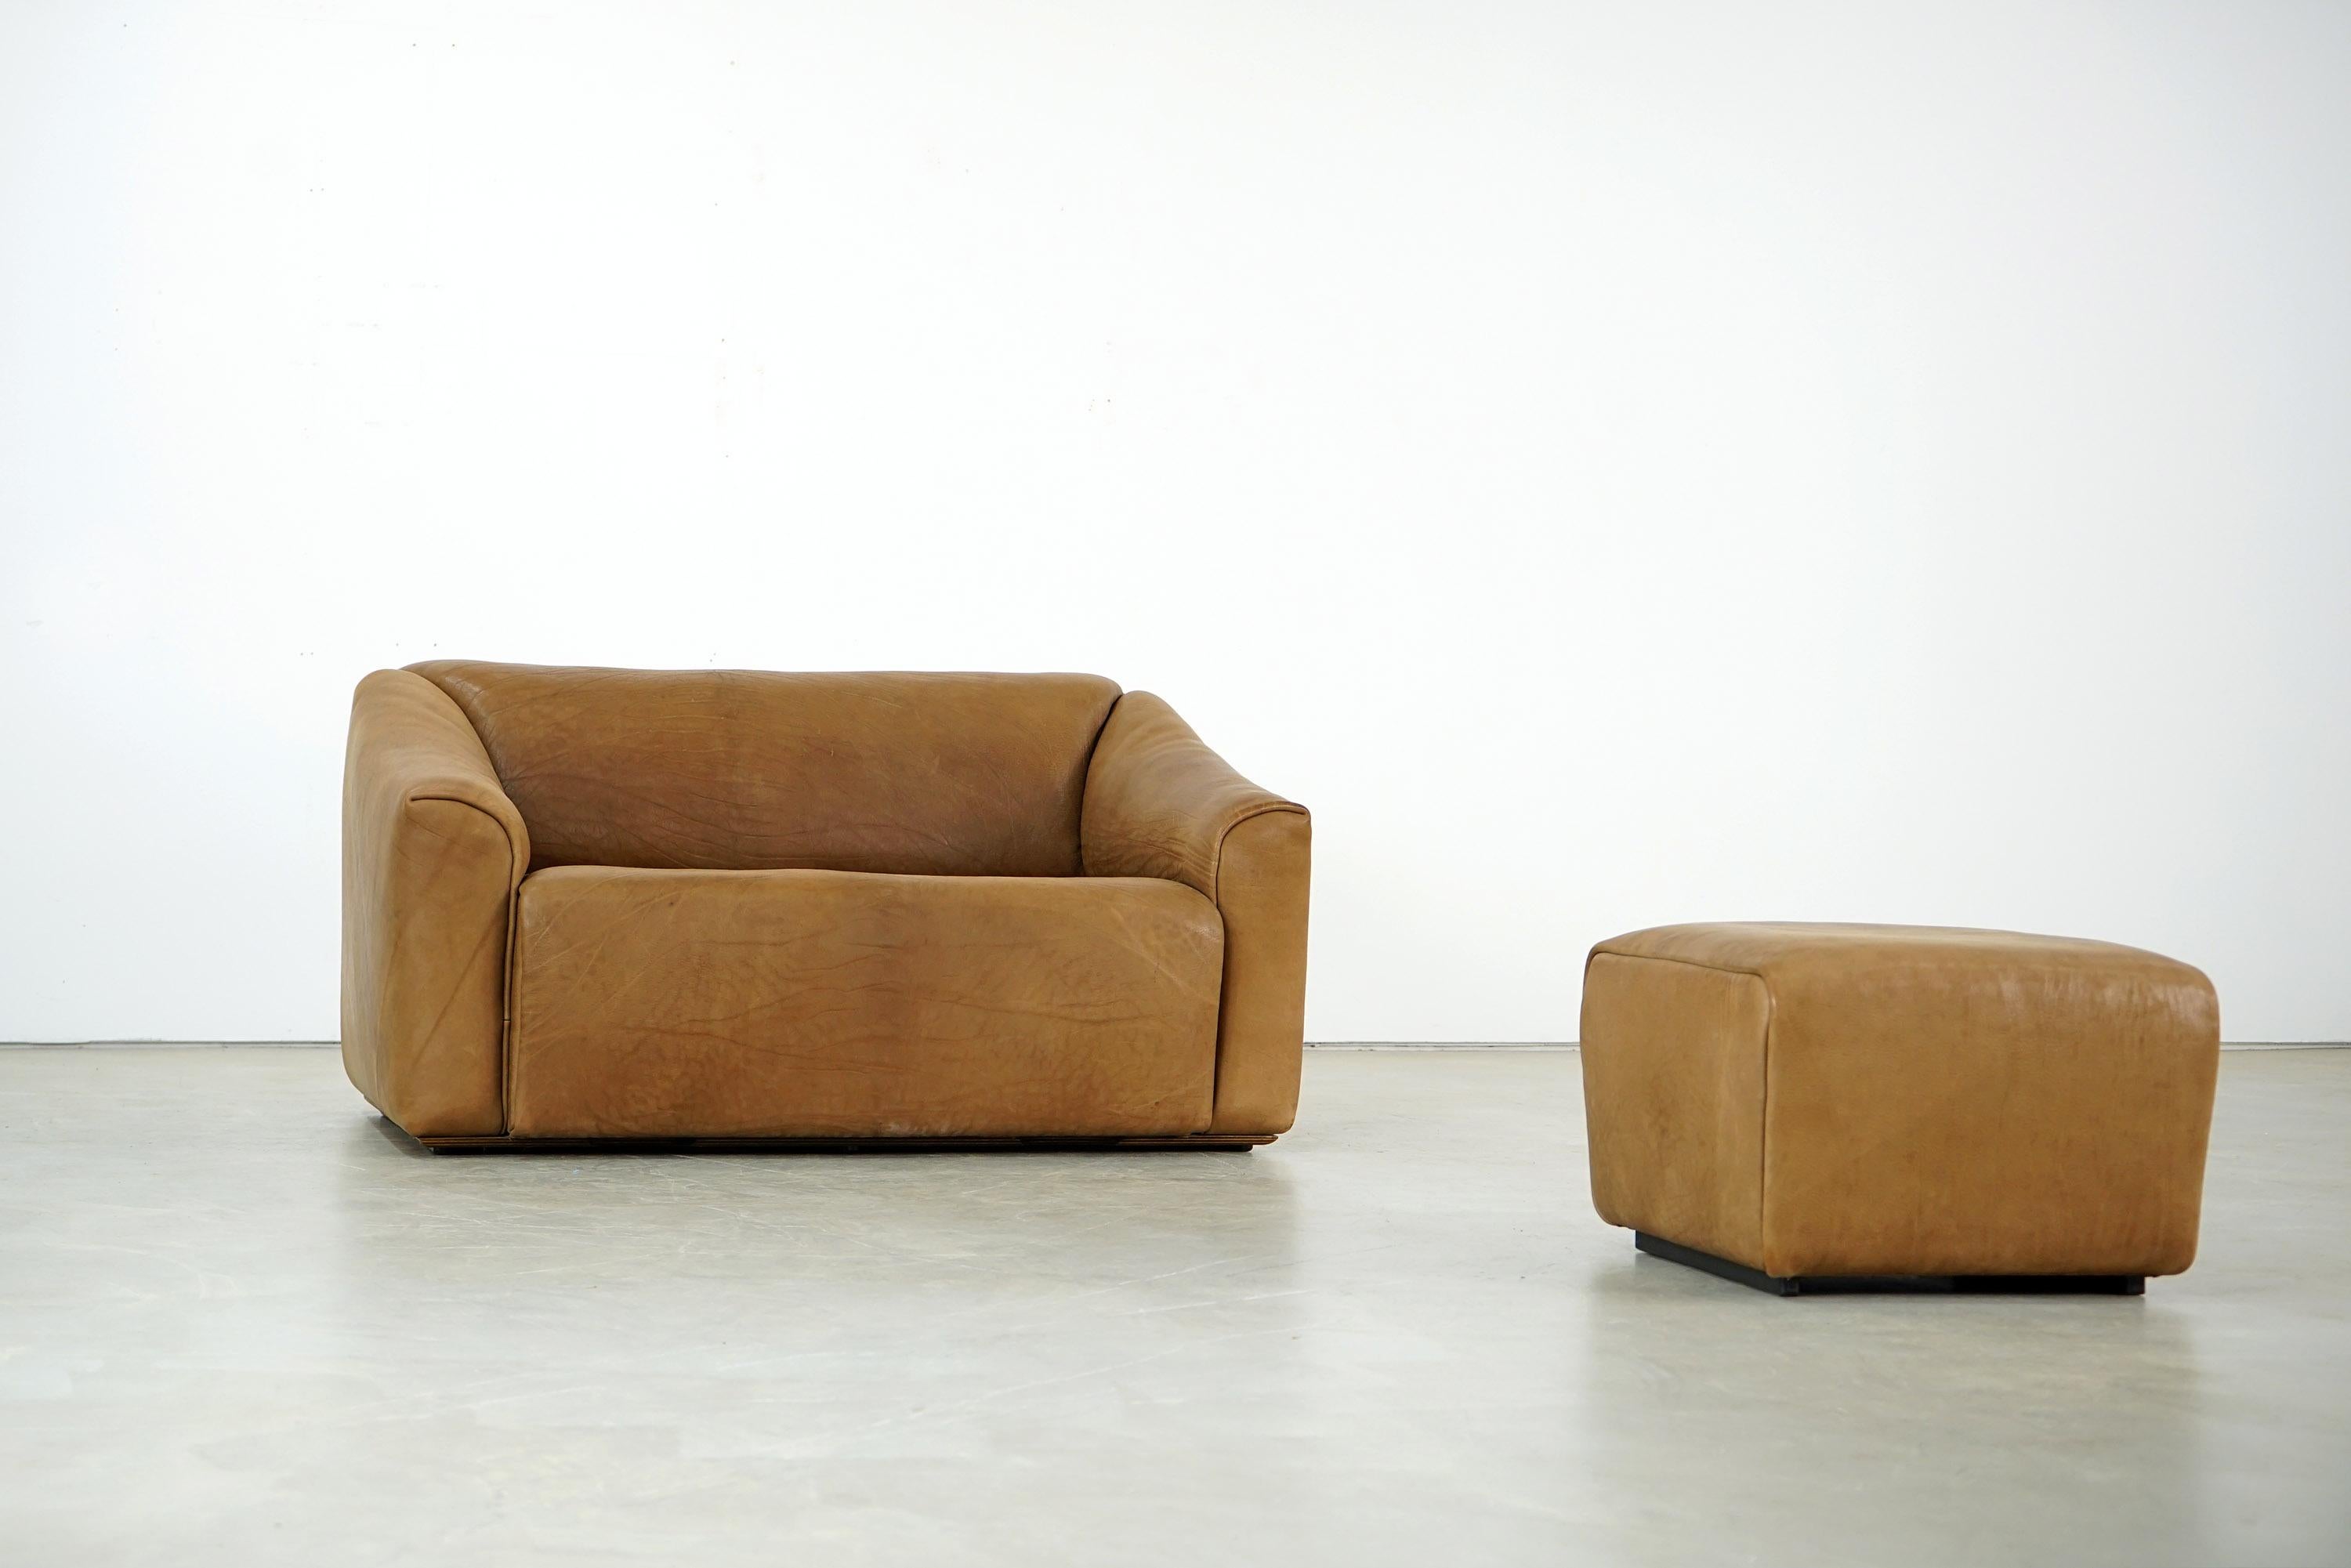 Swiss Rustic Two-Seat Sofa and Ottoman Ds 47 by De Sede, 1960s